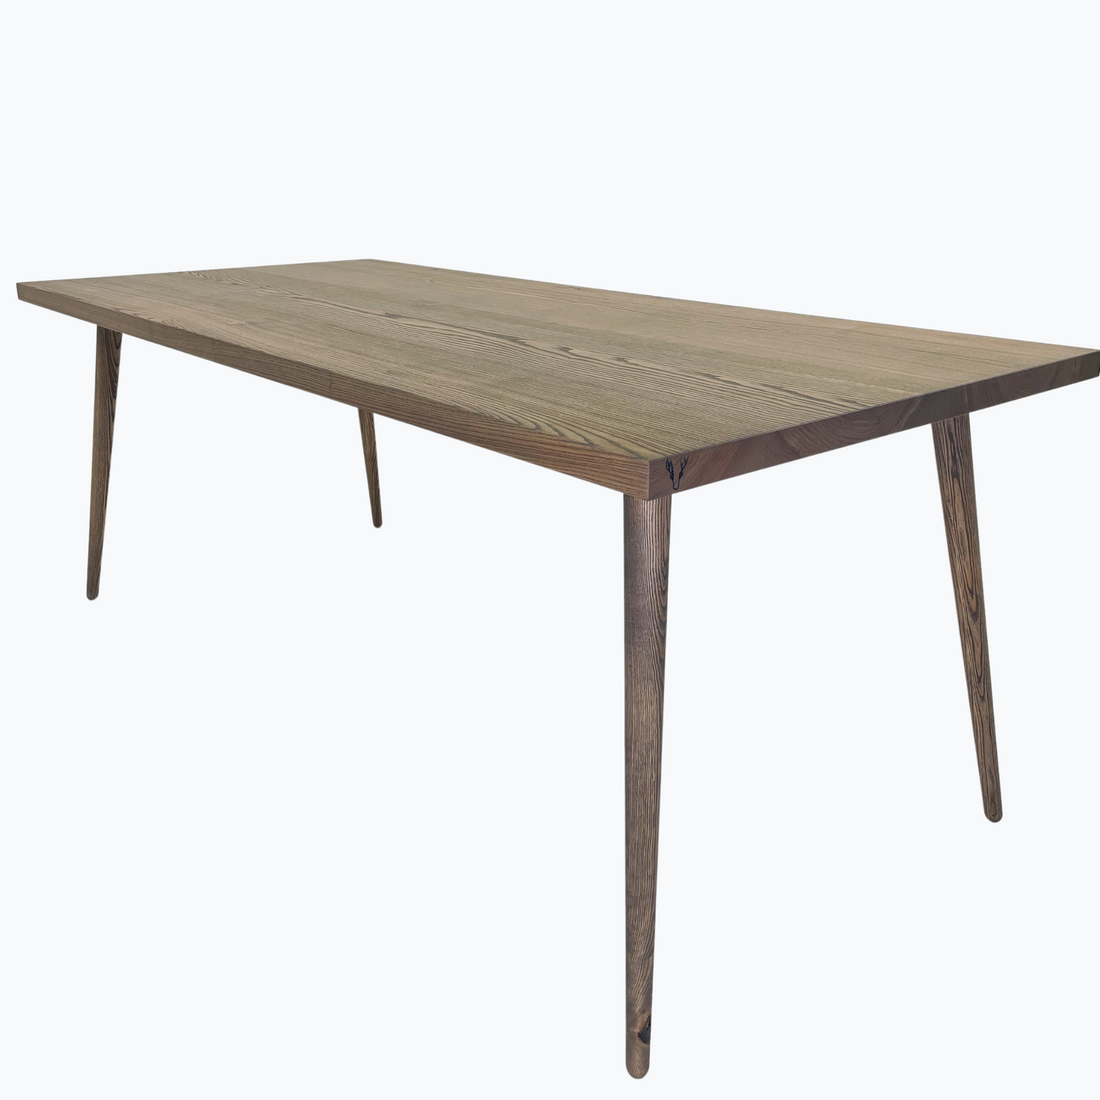  'Bring it on' Ash Wood dining table - Wild Wood Factory